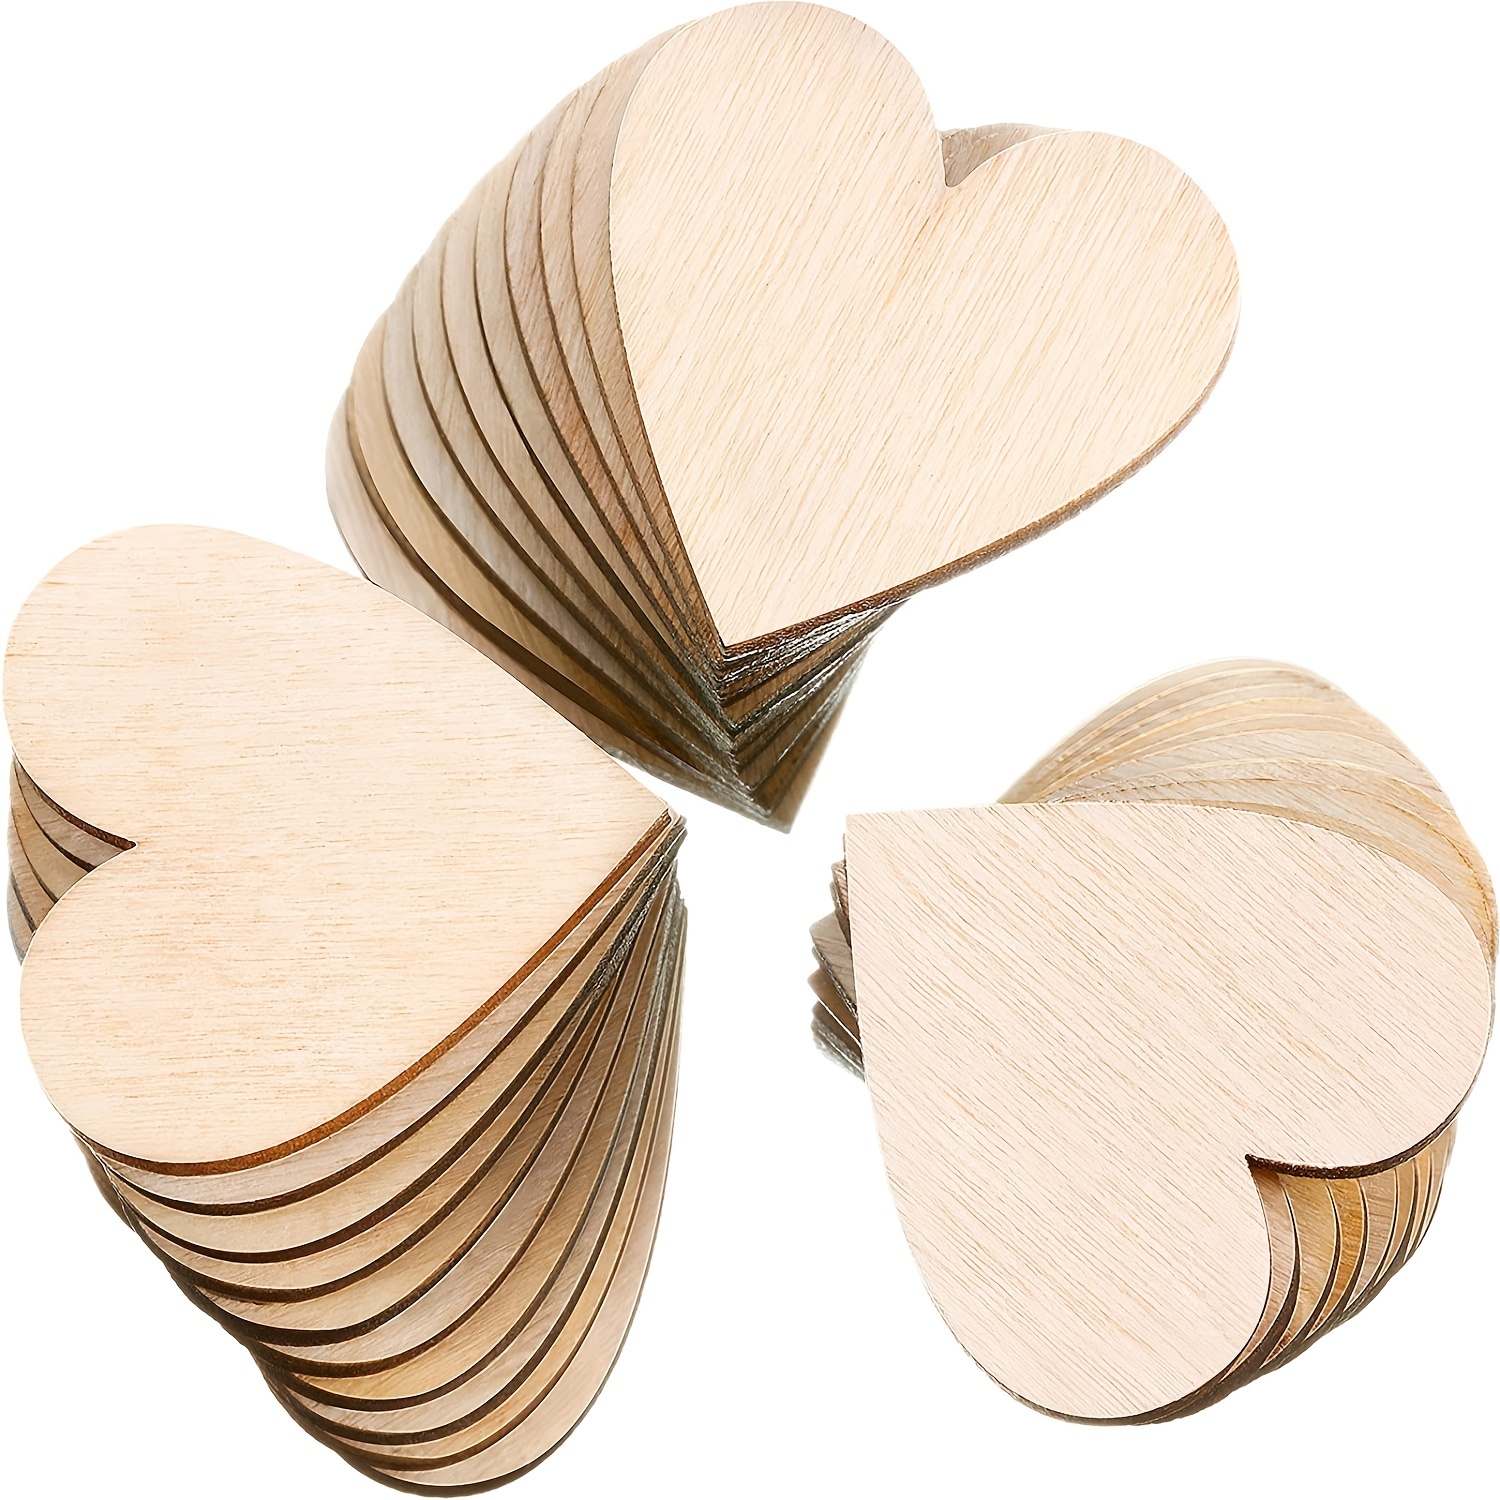 100pcs Wooden Heart Cutouts for Arts and Crafts